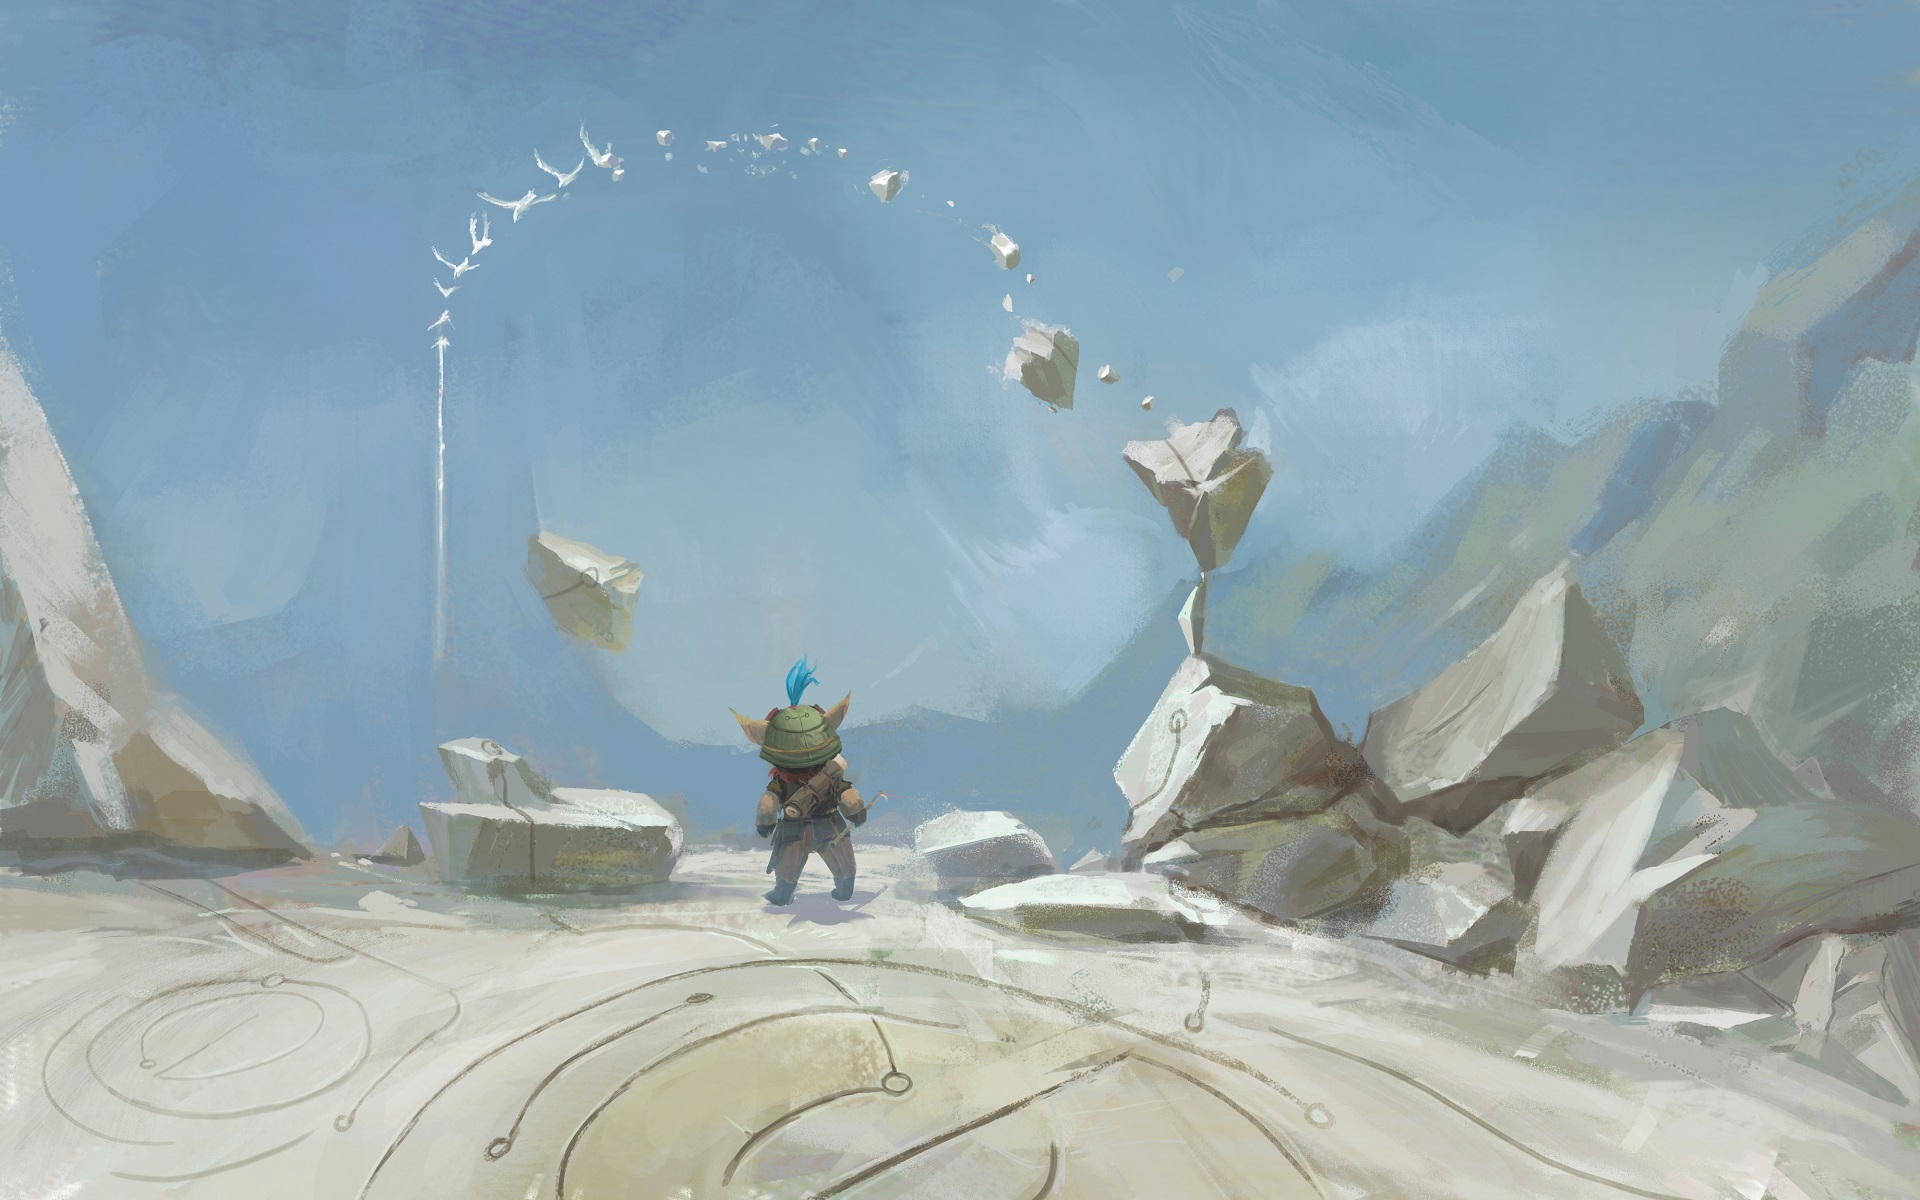 Runeterra is linked to Bandle City, a place spirit realm. There are pathways to get to there, some are like puzzles while some of them shift locations over time. Teemo is shown standing in front of one of the pathways that has boulders and rocks floating.